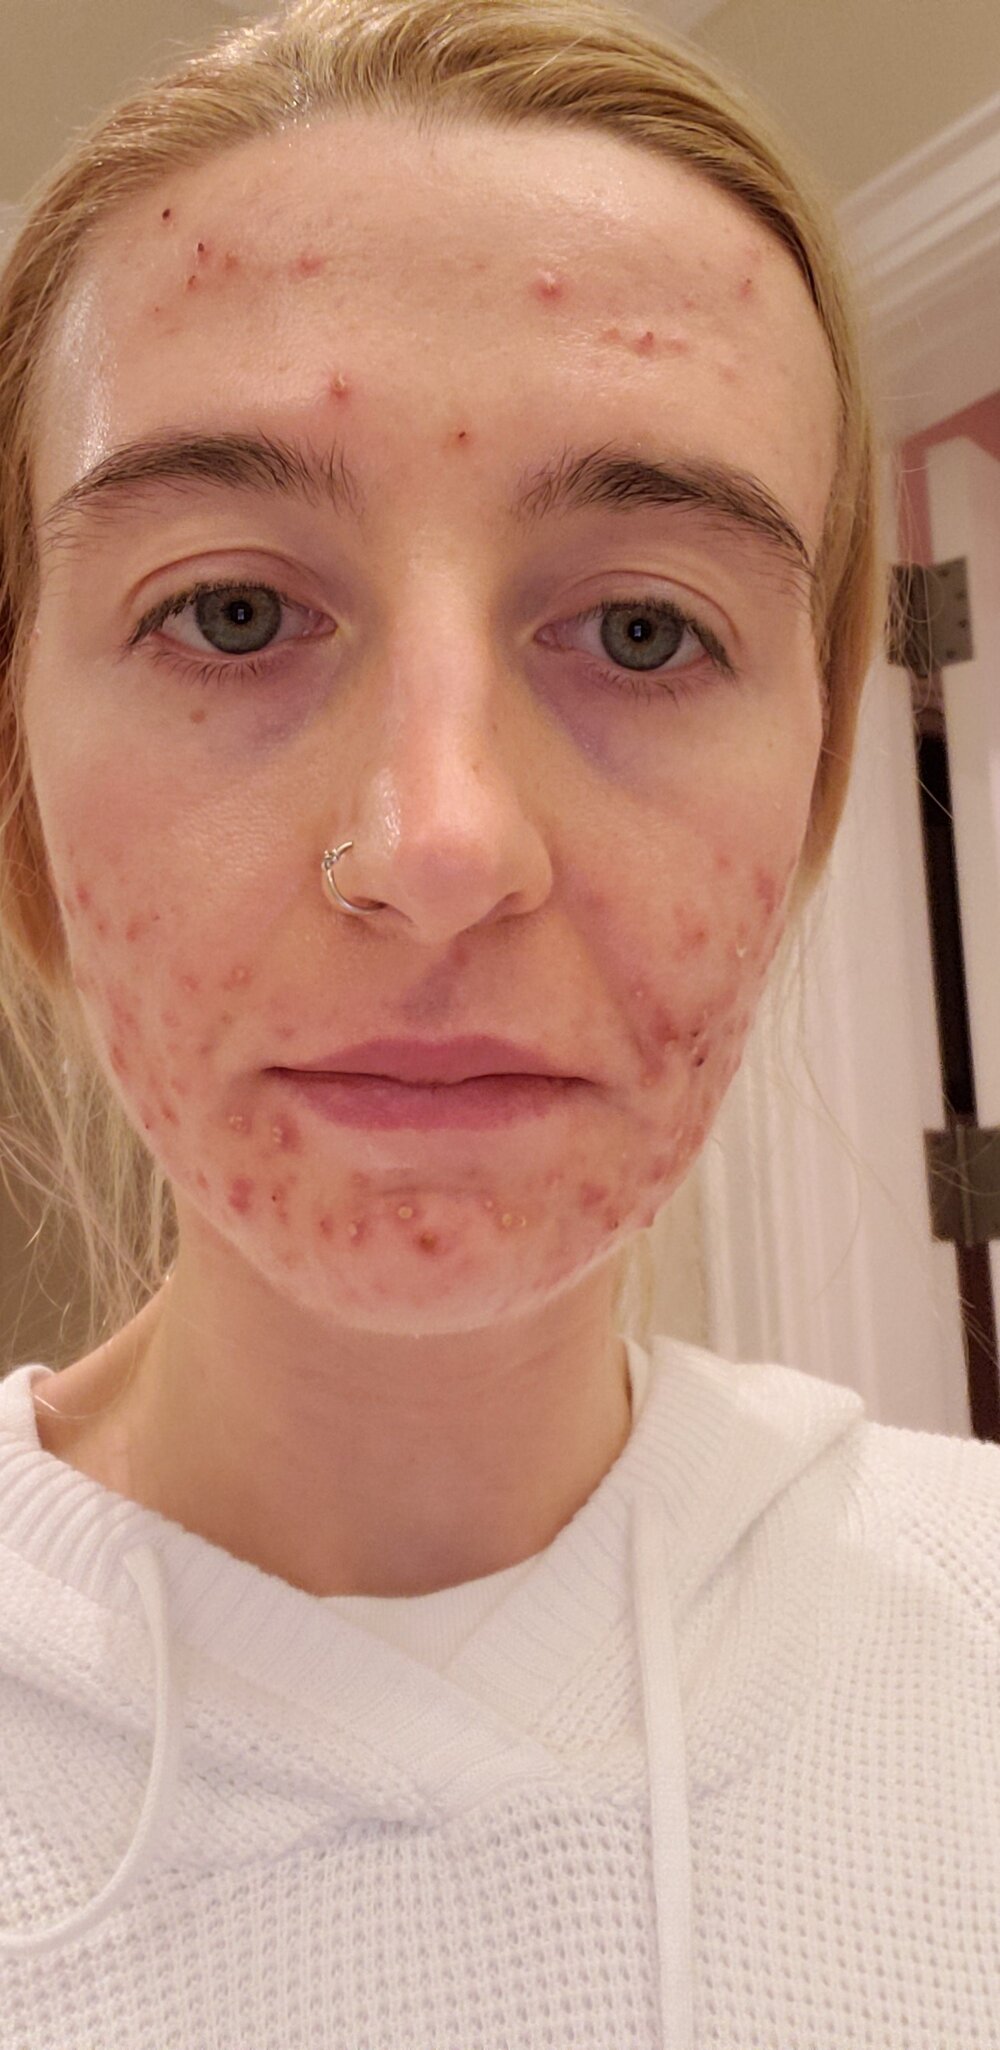 Can I Drink Alcohol While Taking Accutane?